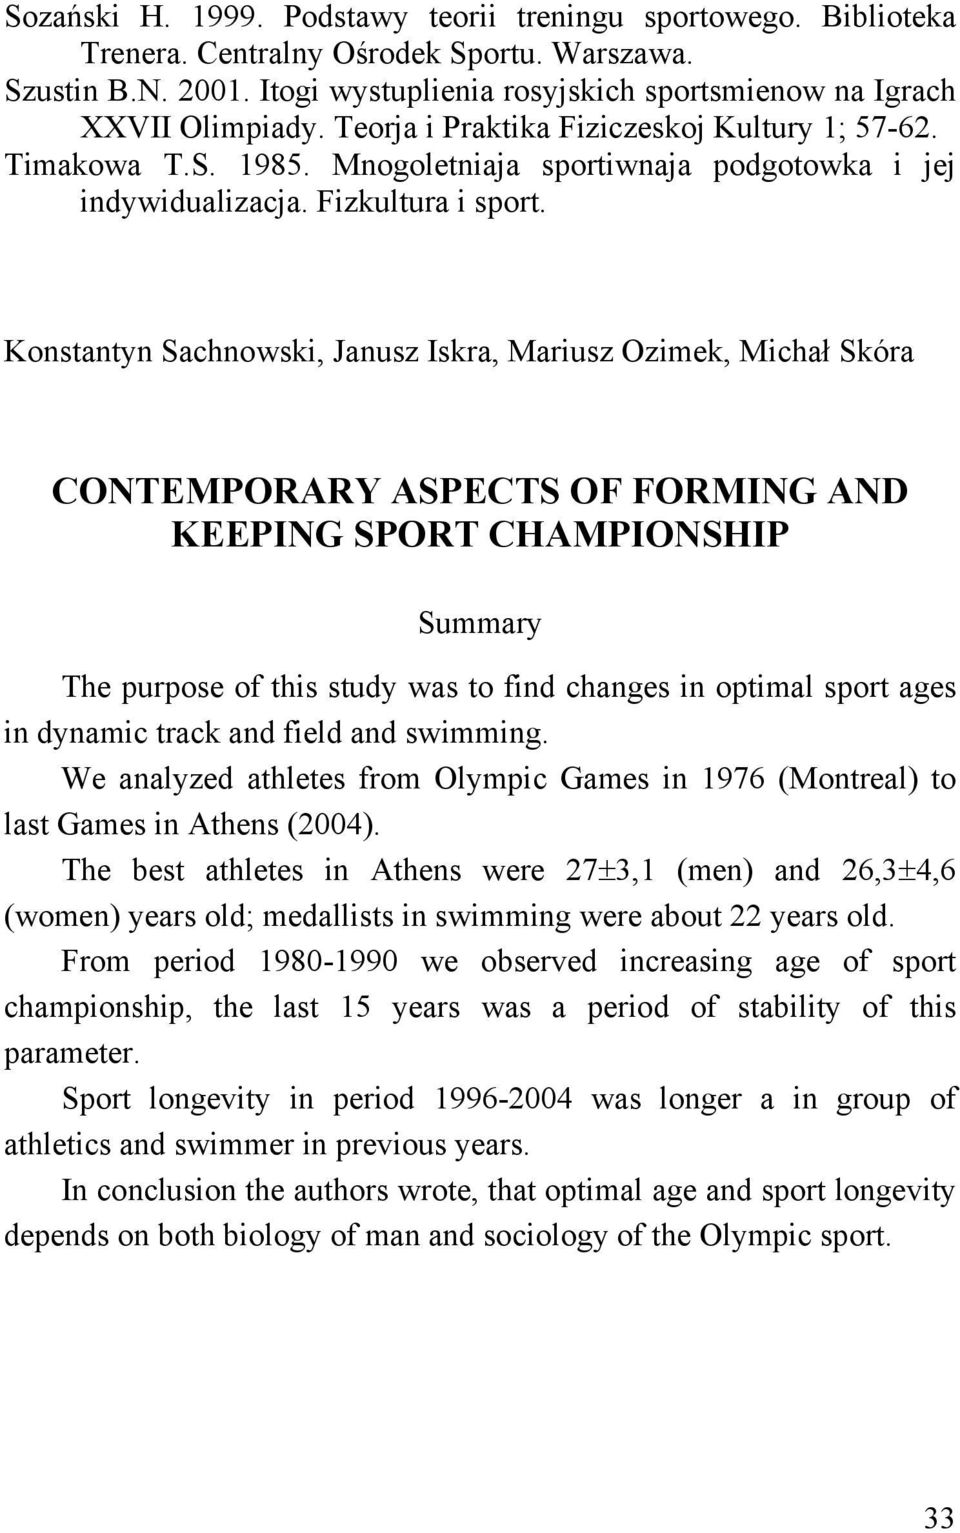 Konstantyn Sachnowski, Janusz Iskra, Mariusz Ozimek, Michał Skóra CONTEMPORARY ASPECTS OF FORMING AND KEEPING SPORT CHAMPIONSHIP Summary The purpose of this study was to find changes in optimal sport